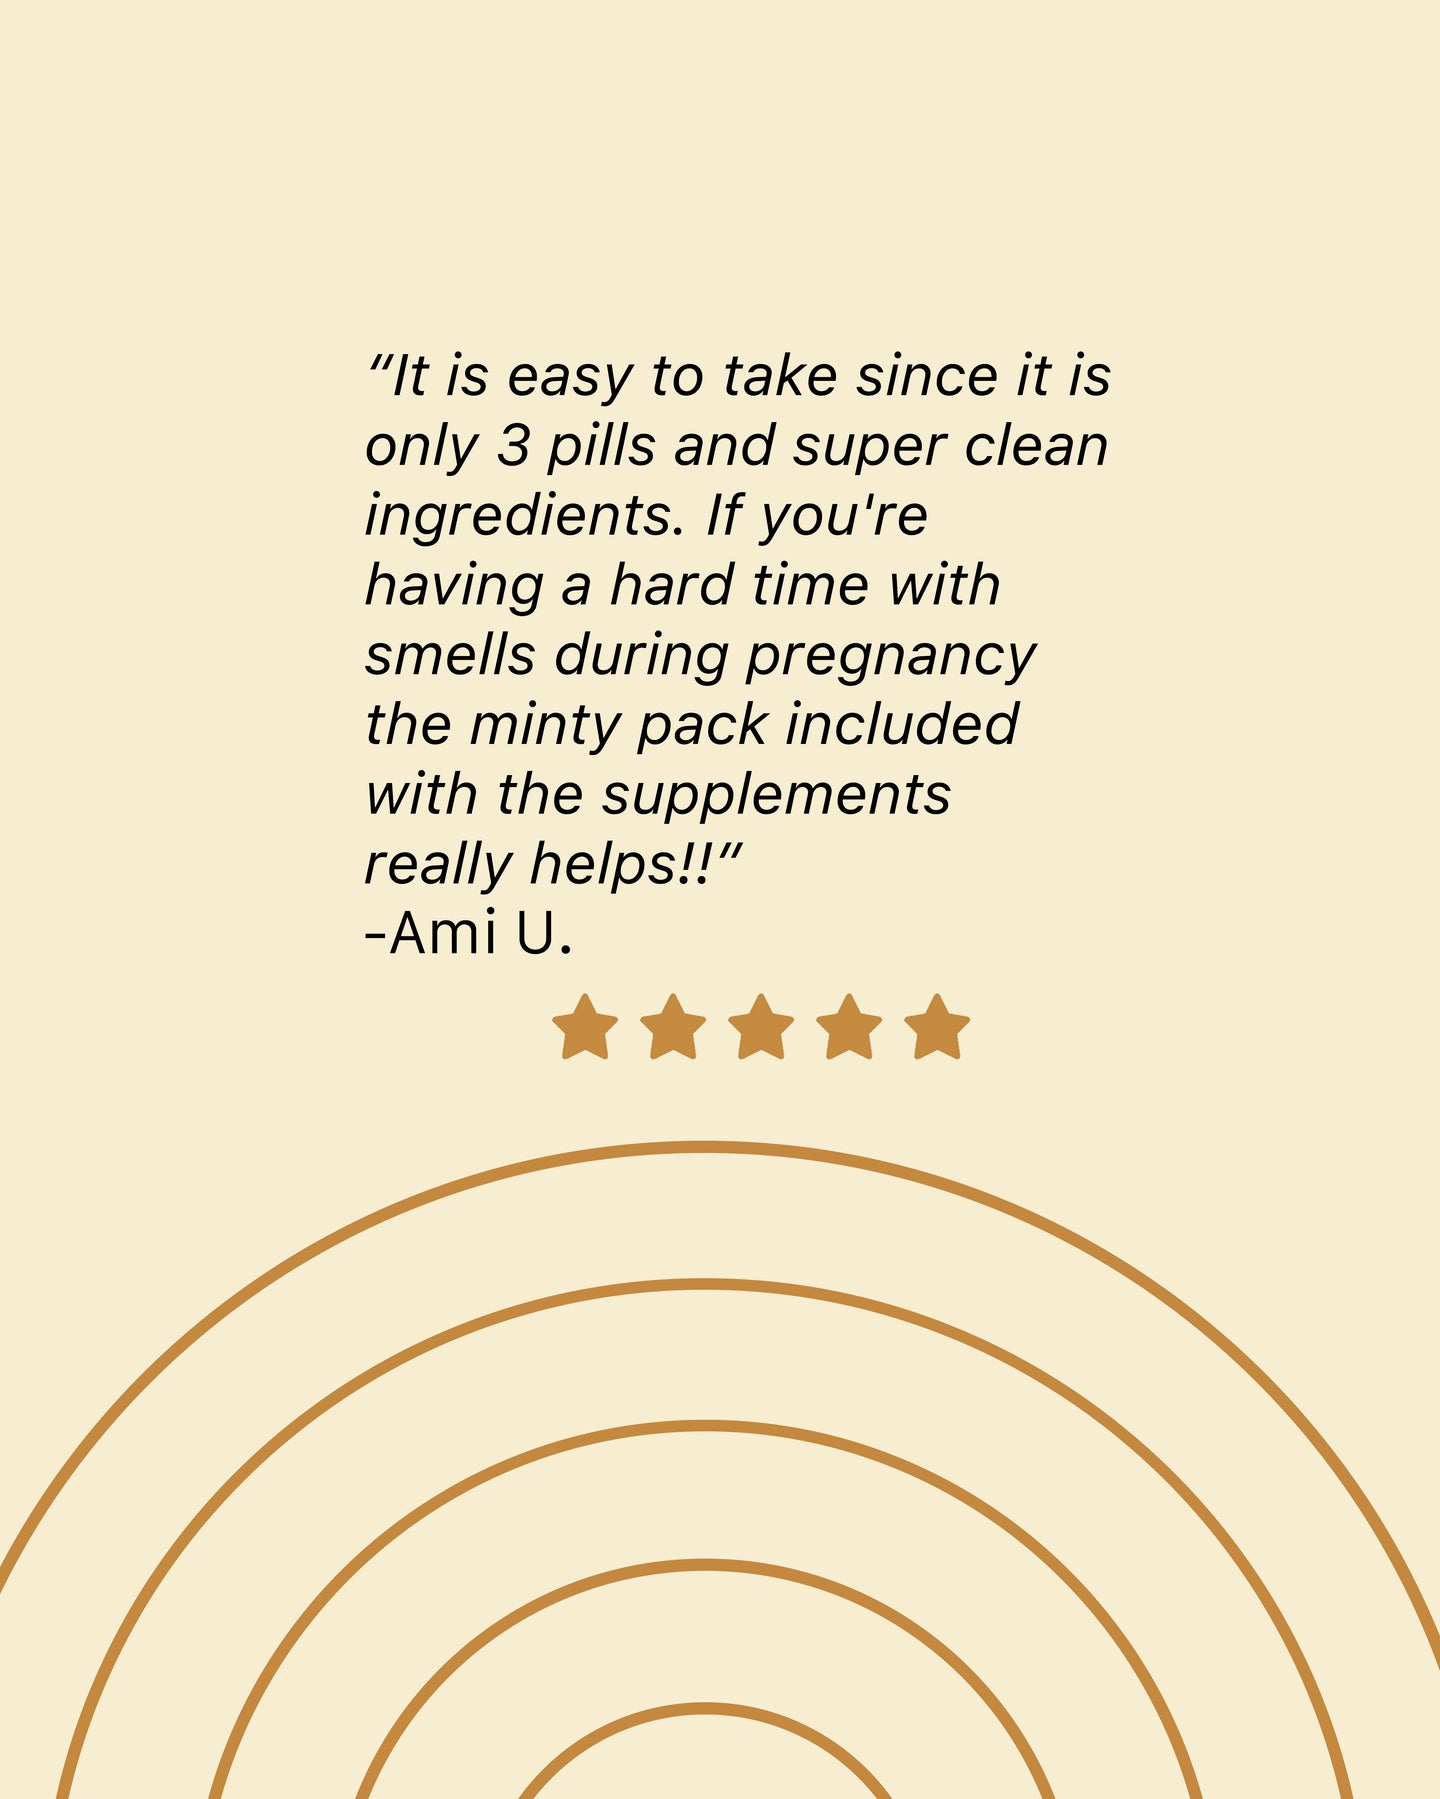 A review left by Ami U It is easy to take since it is  only 3 pills and super clean ingredients If your having a hard time with smells during pregnancy the minty pack included with the supplements really helps